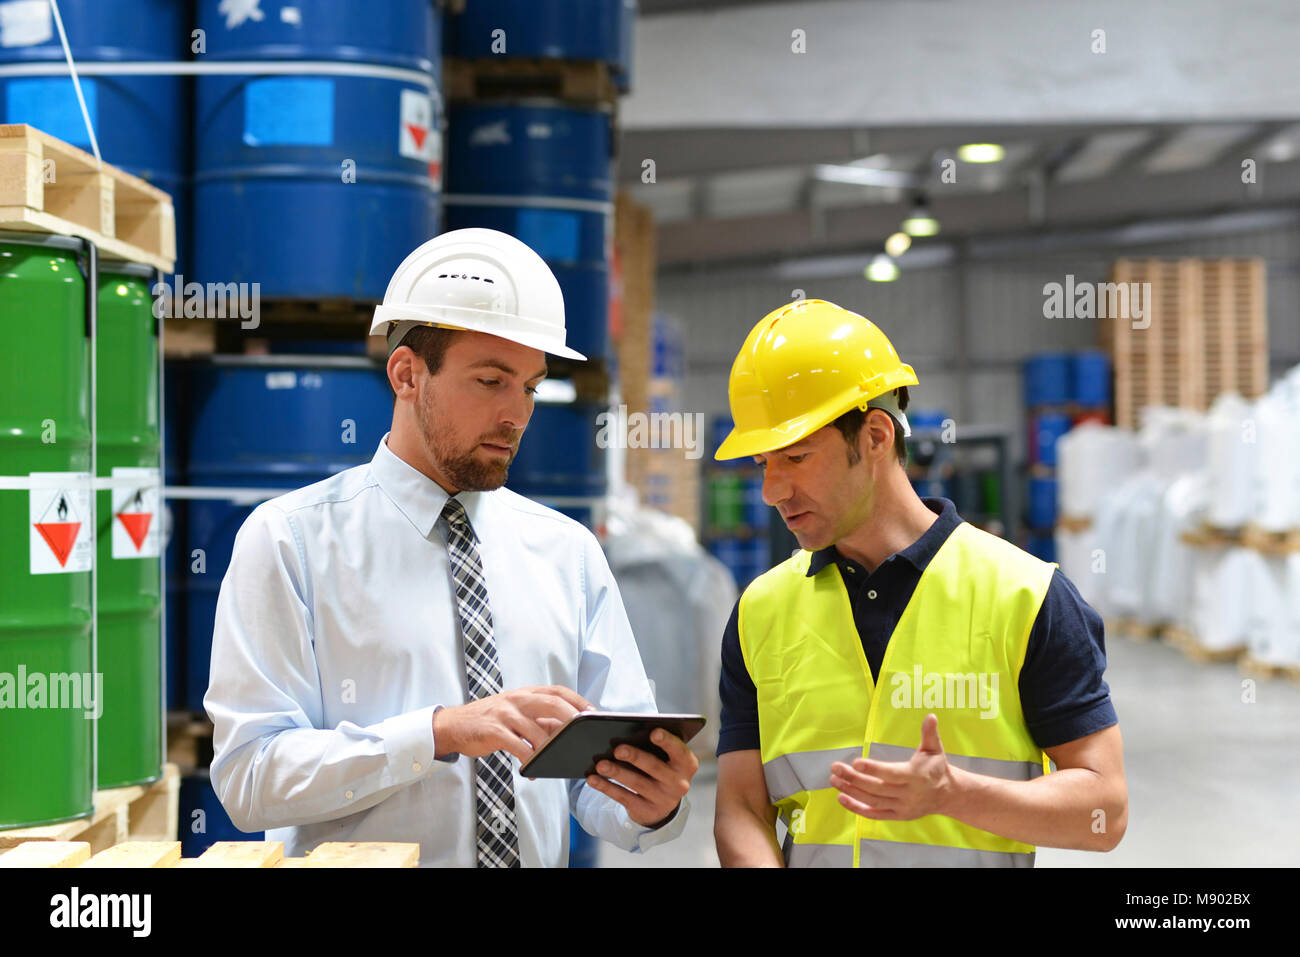 managers and workers in the logistics industry talk about working with chemicals in the warehouse Stock Photo